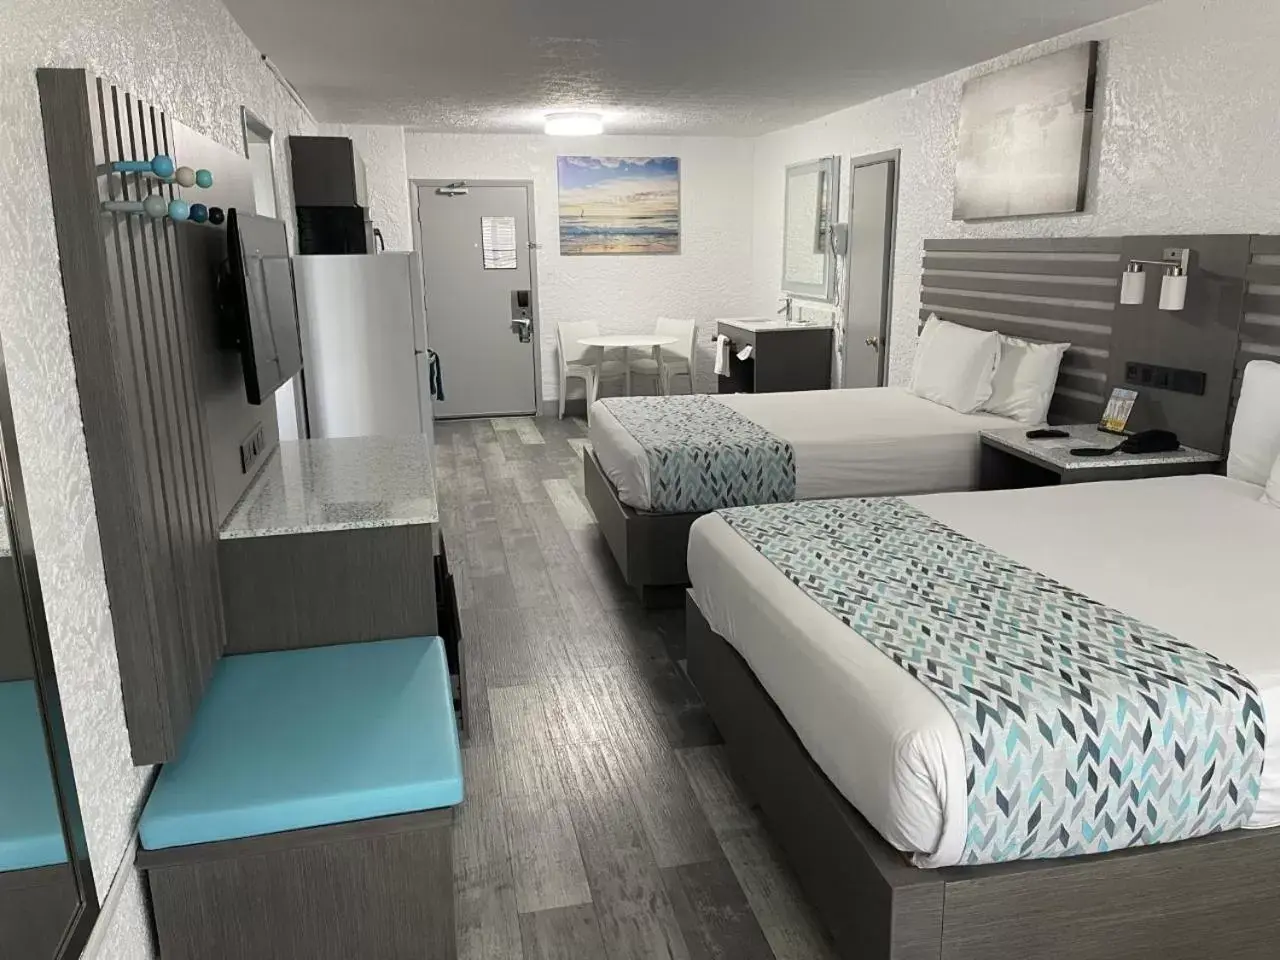 Deluxe Queen Room with Full Kitchen and Gulf View (No Resort Fee) in Casa Loma Panama City Beach - Beachfront